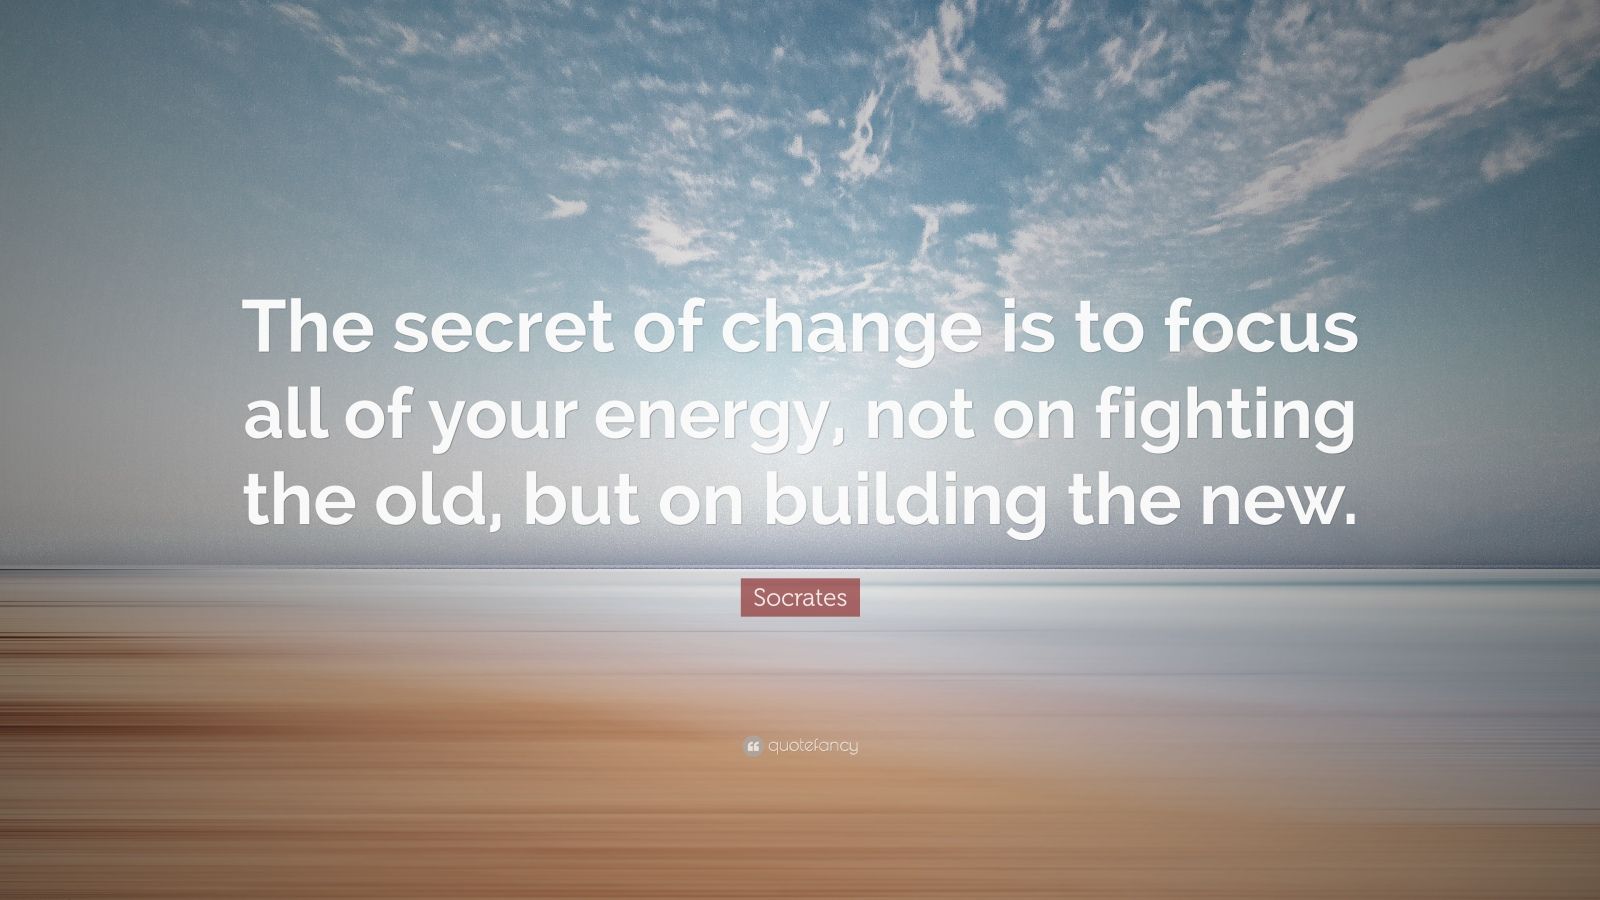 Socrates Quote: “The secret of change is to focus all of your energy